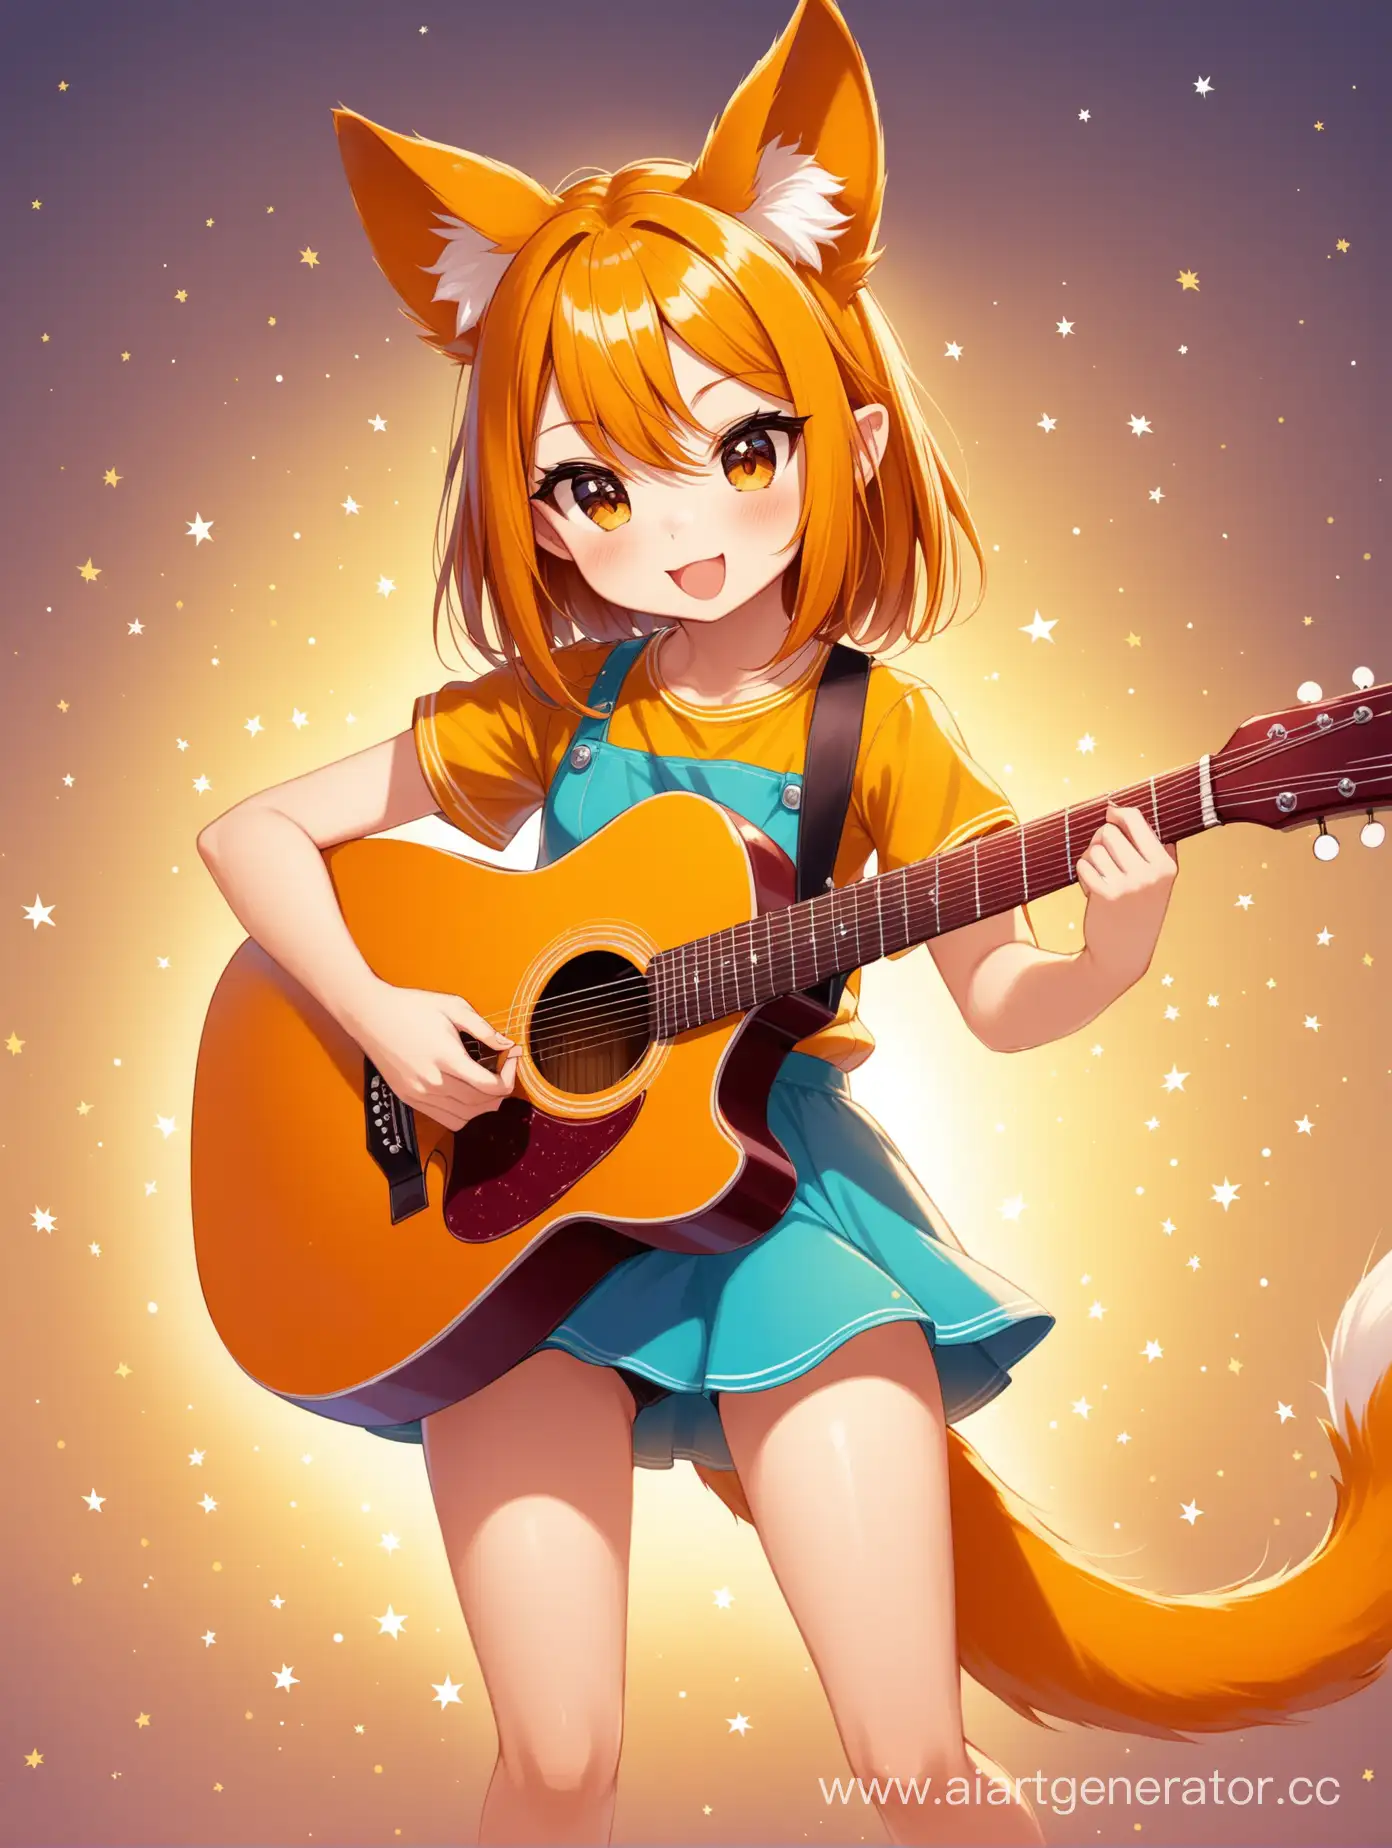 Adorable-Girl-with-Ears-and-Tail-Playing-Guitar